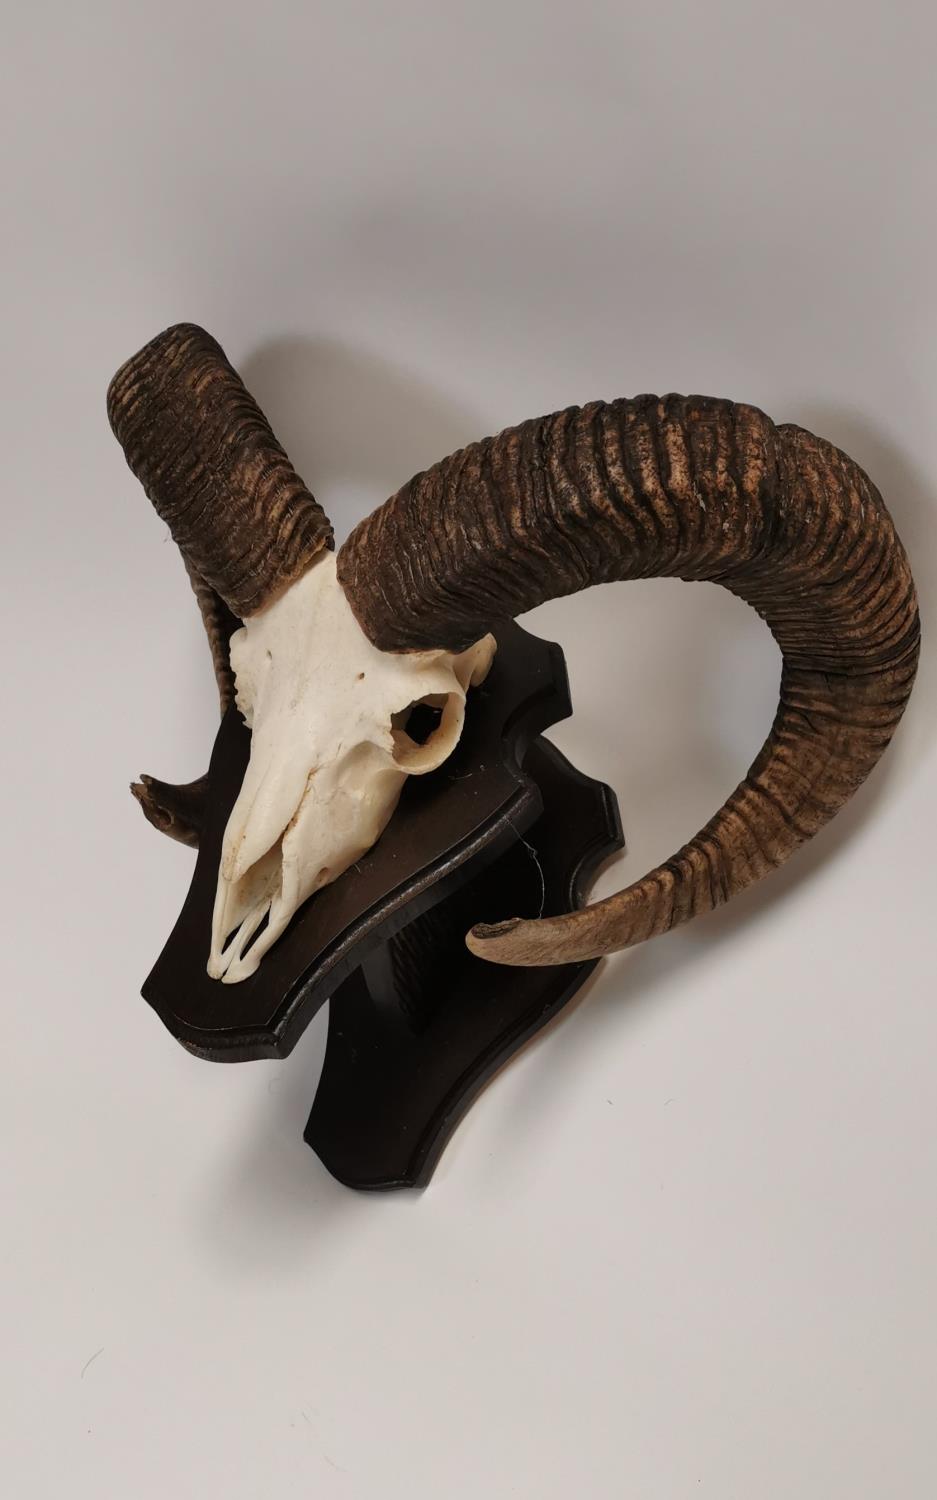 Ram's skull mounted on a plaque.